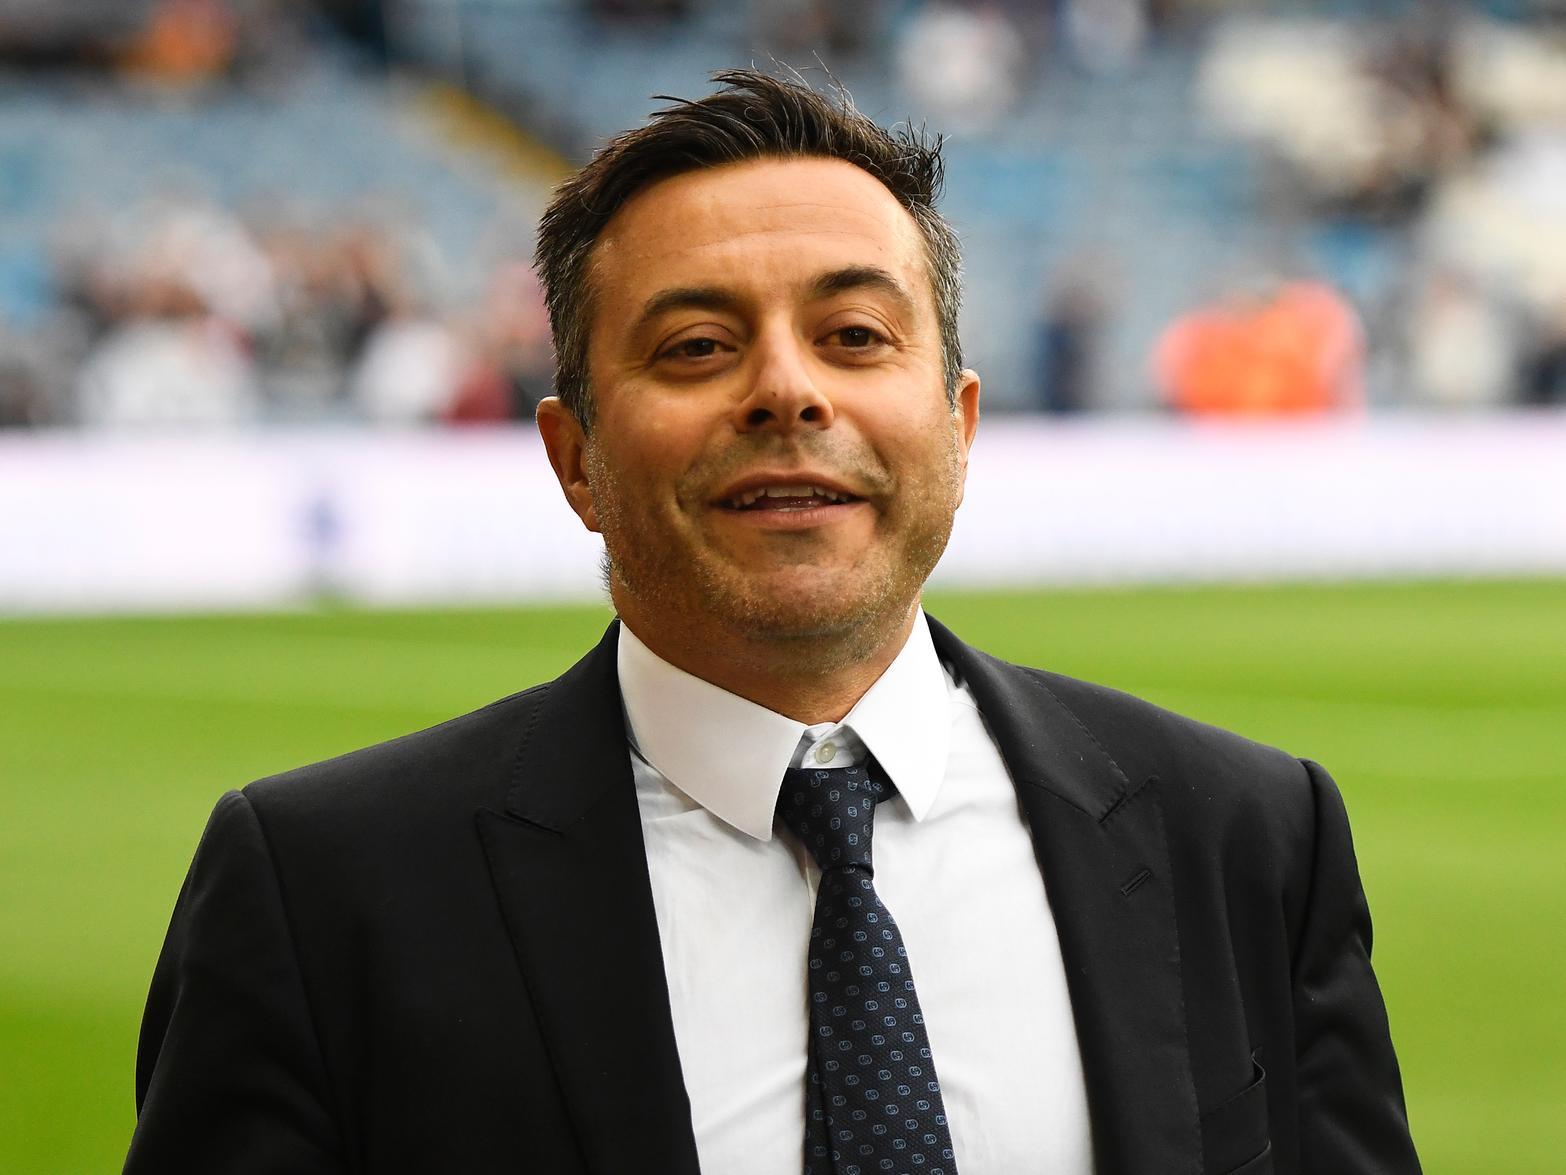 Leeds United are said to be a 'long way' from securing investment from Qatari-based QSI, but the club's 'saleable' status should see them have no trouble securing strong financial backing in the relatively near future. (The Athletic)